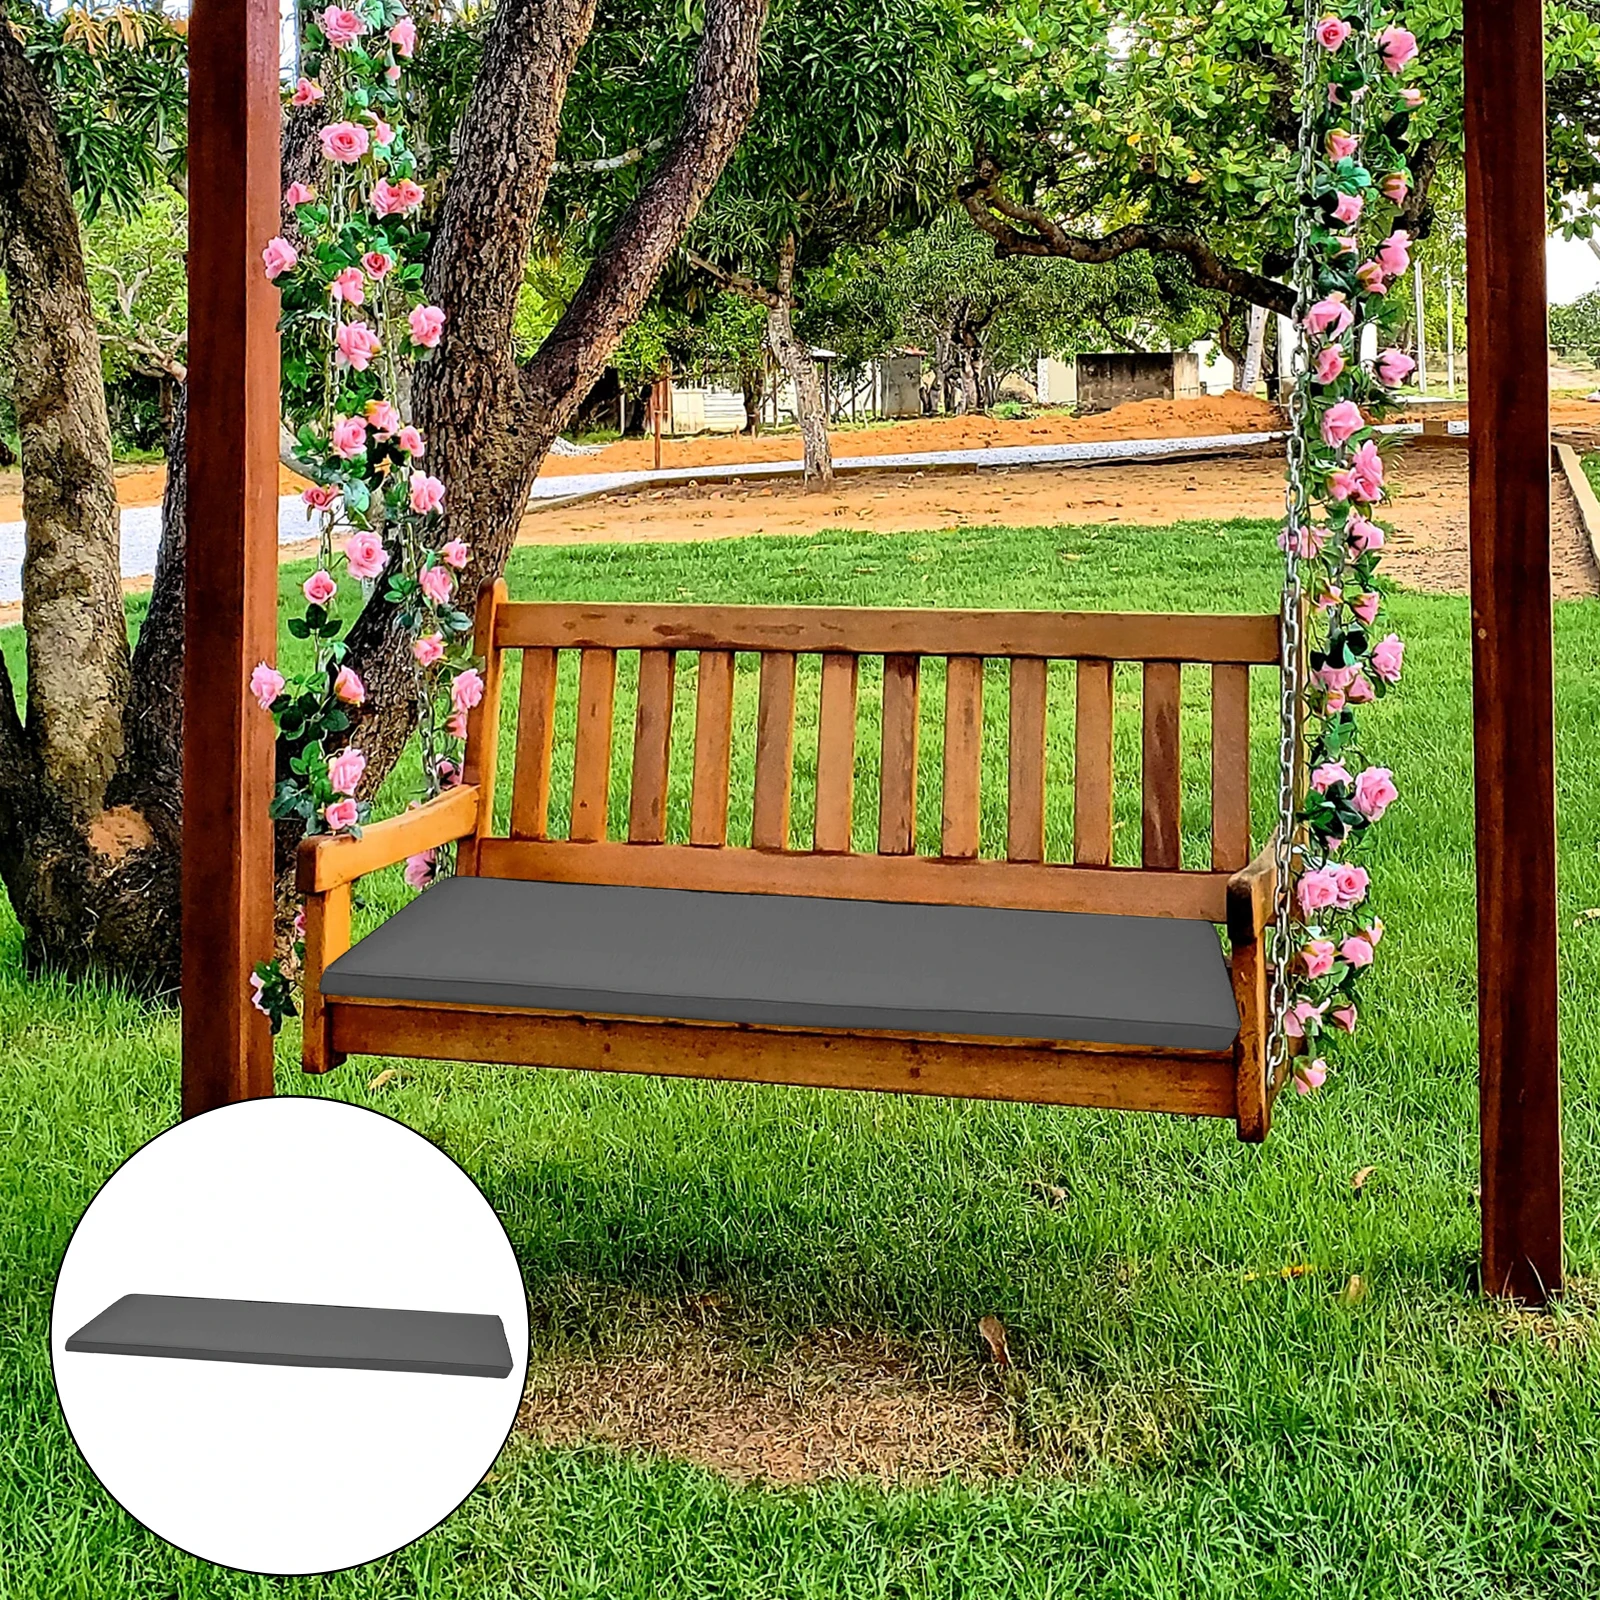 120x42cm Outdoor/Indoor Waterproof Bench Seat Cushion Garden Patio Furniture Removable Cover Seat Pads 3 Seater Long Cushion